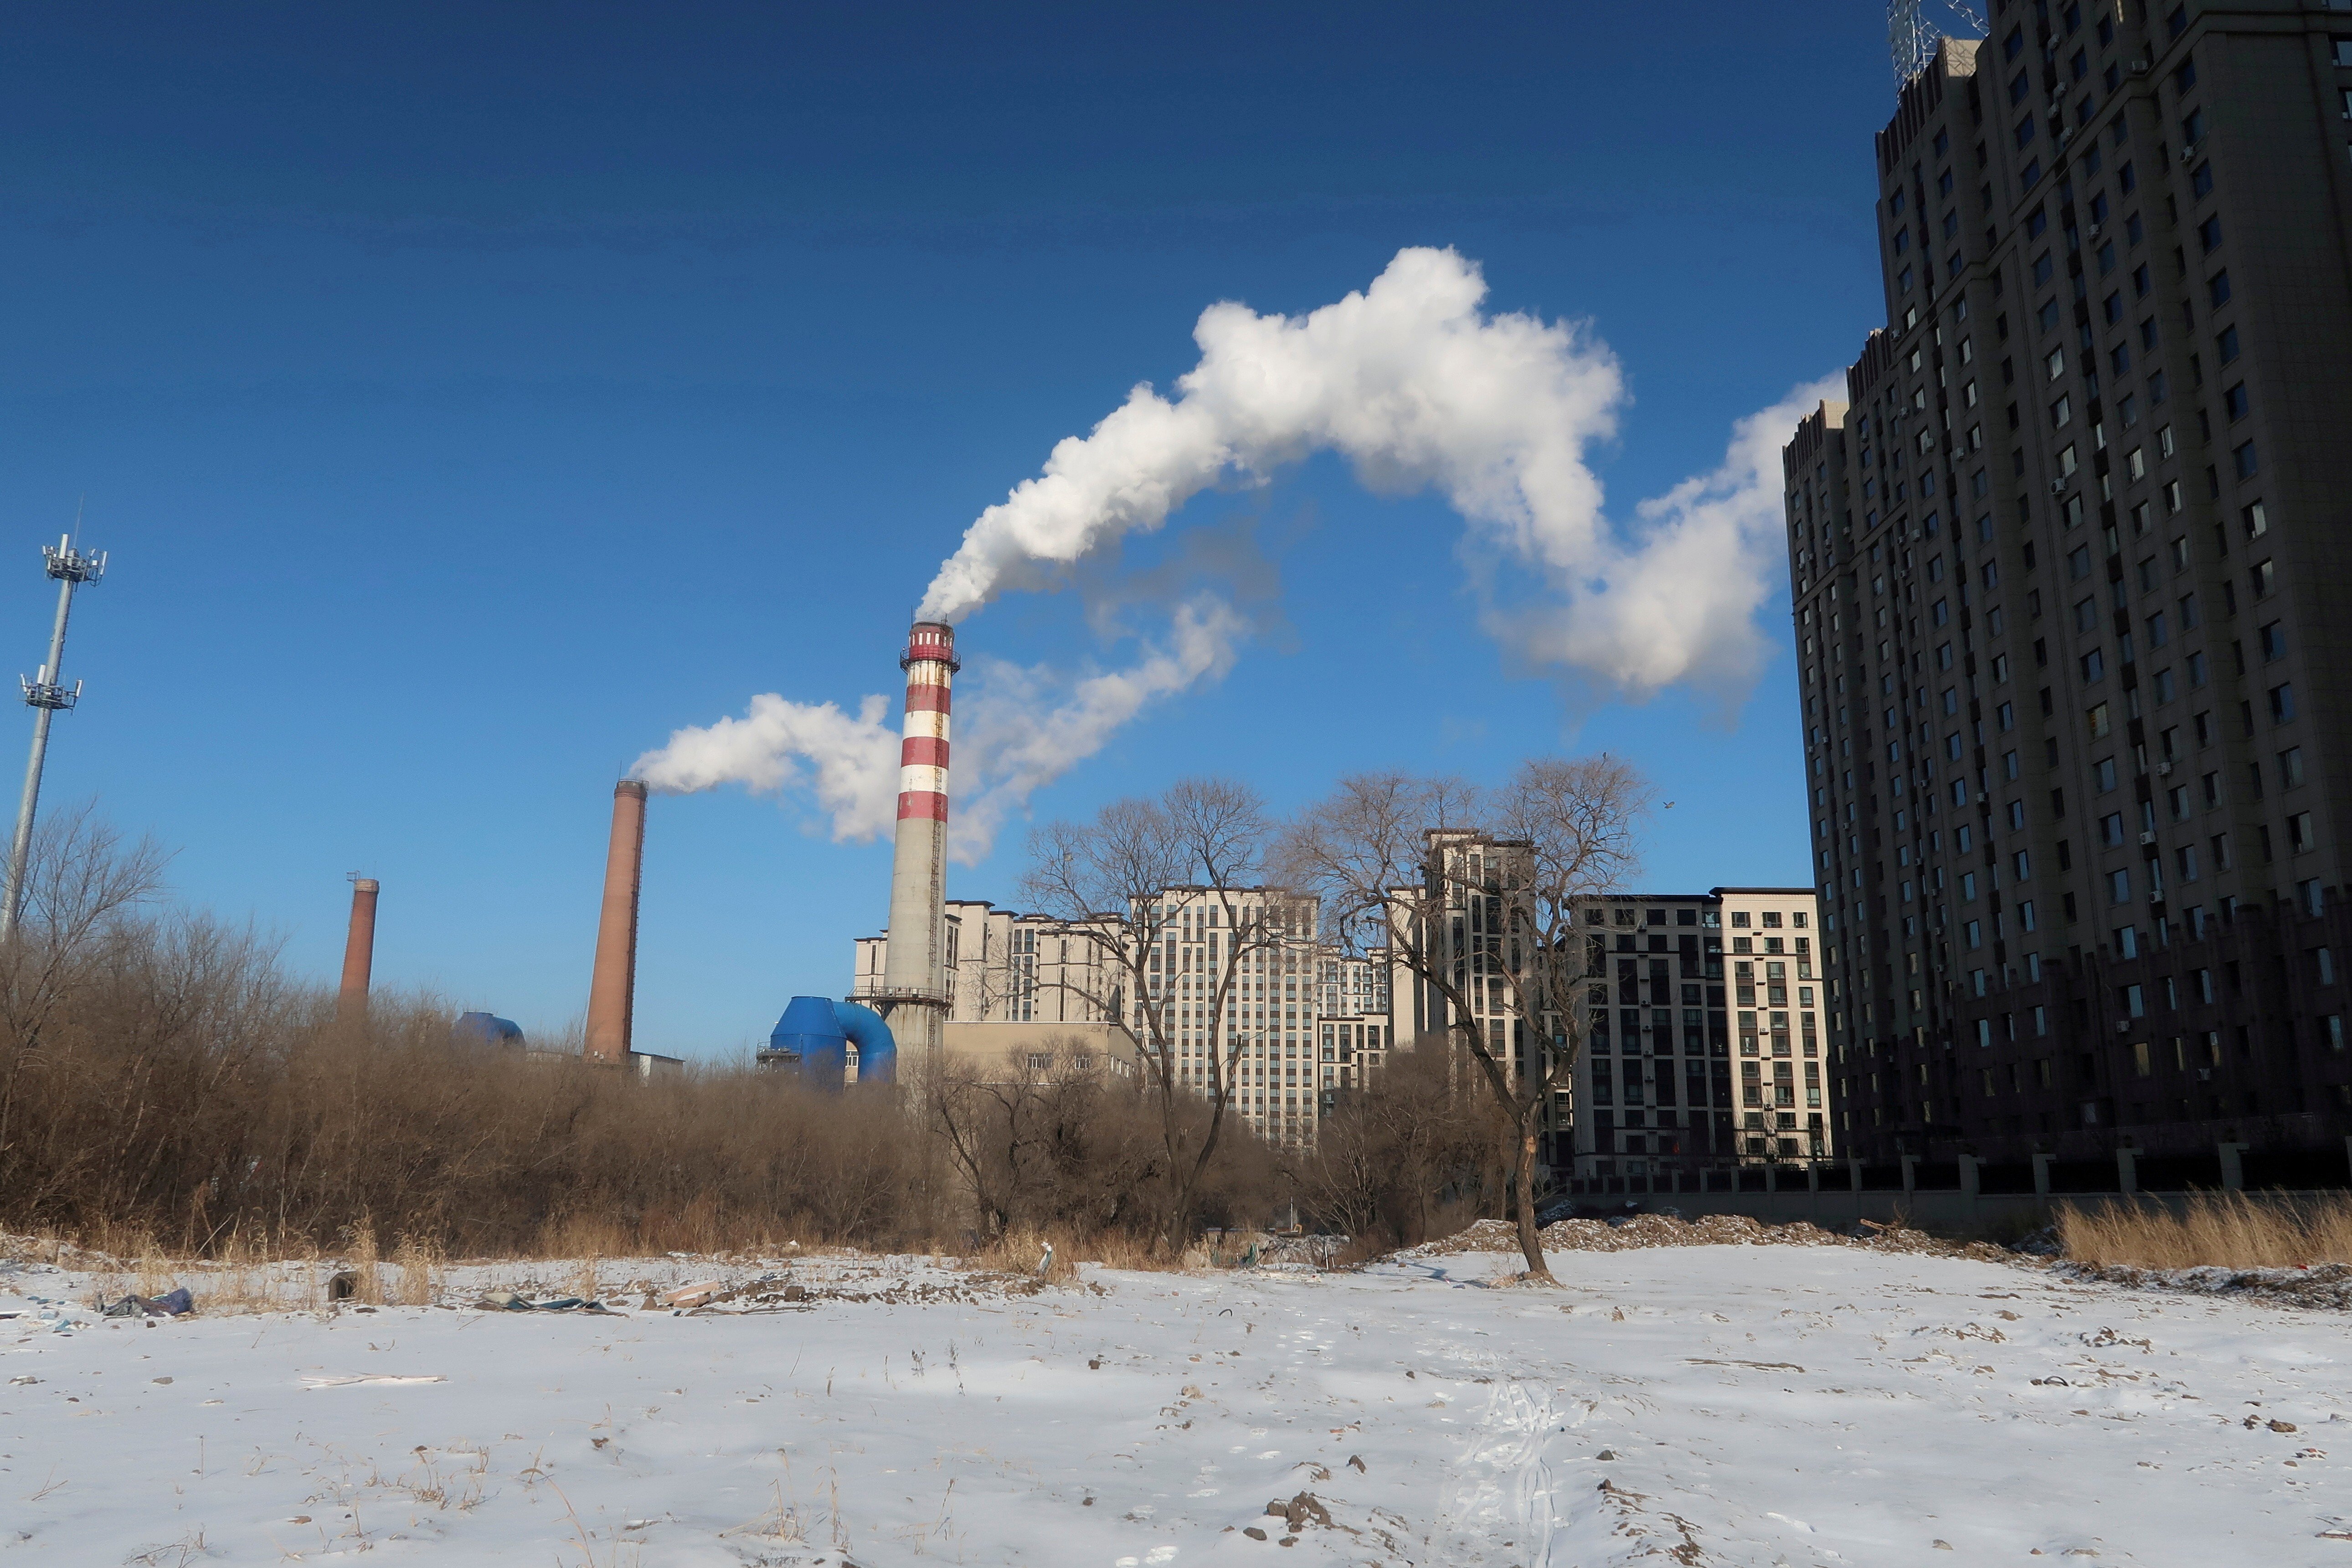 Wang Yi, a climate specialist with the Chinese Academy of Sciences, says China has plans for emissions control under its five-year plan for economic and social development to 2025. Photo: Reuters